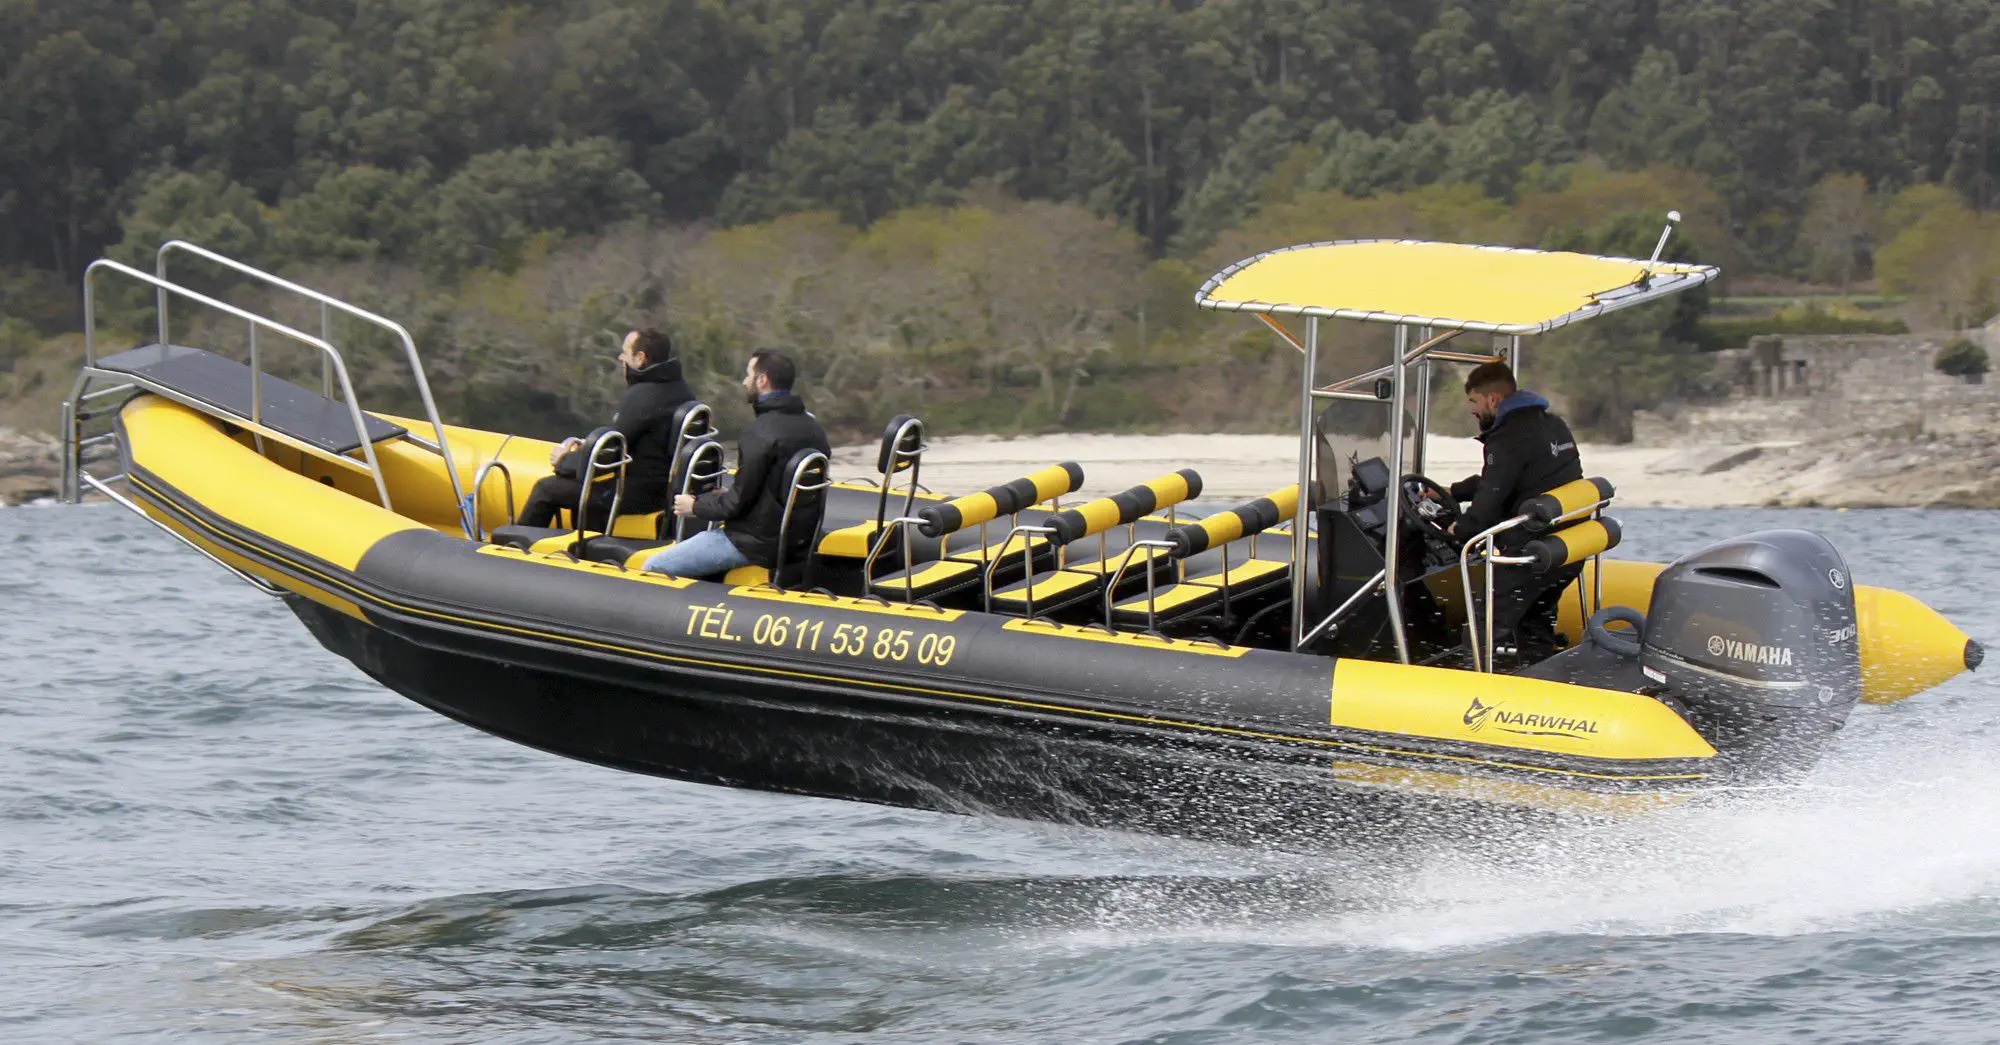 Narwhal 900 rib boat with 12 seats and T-top 